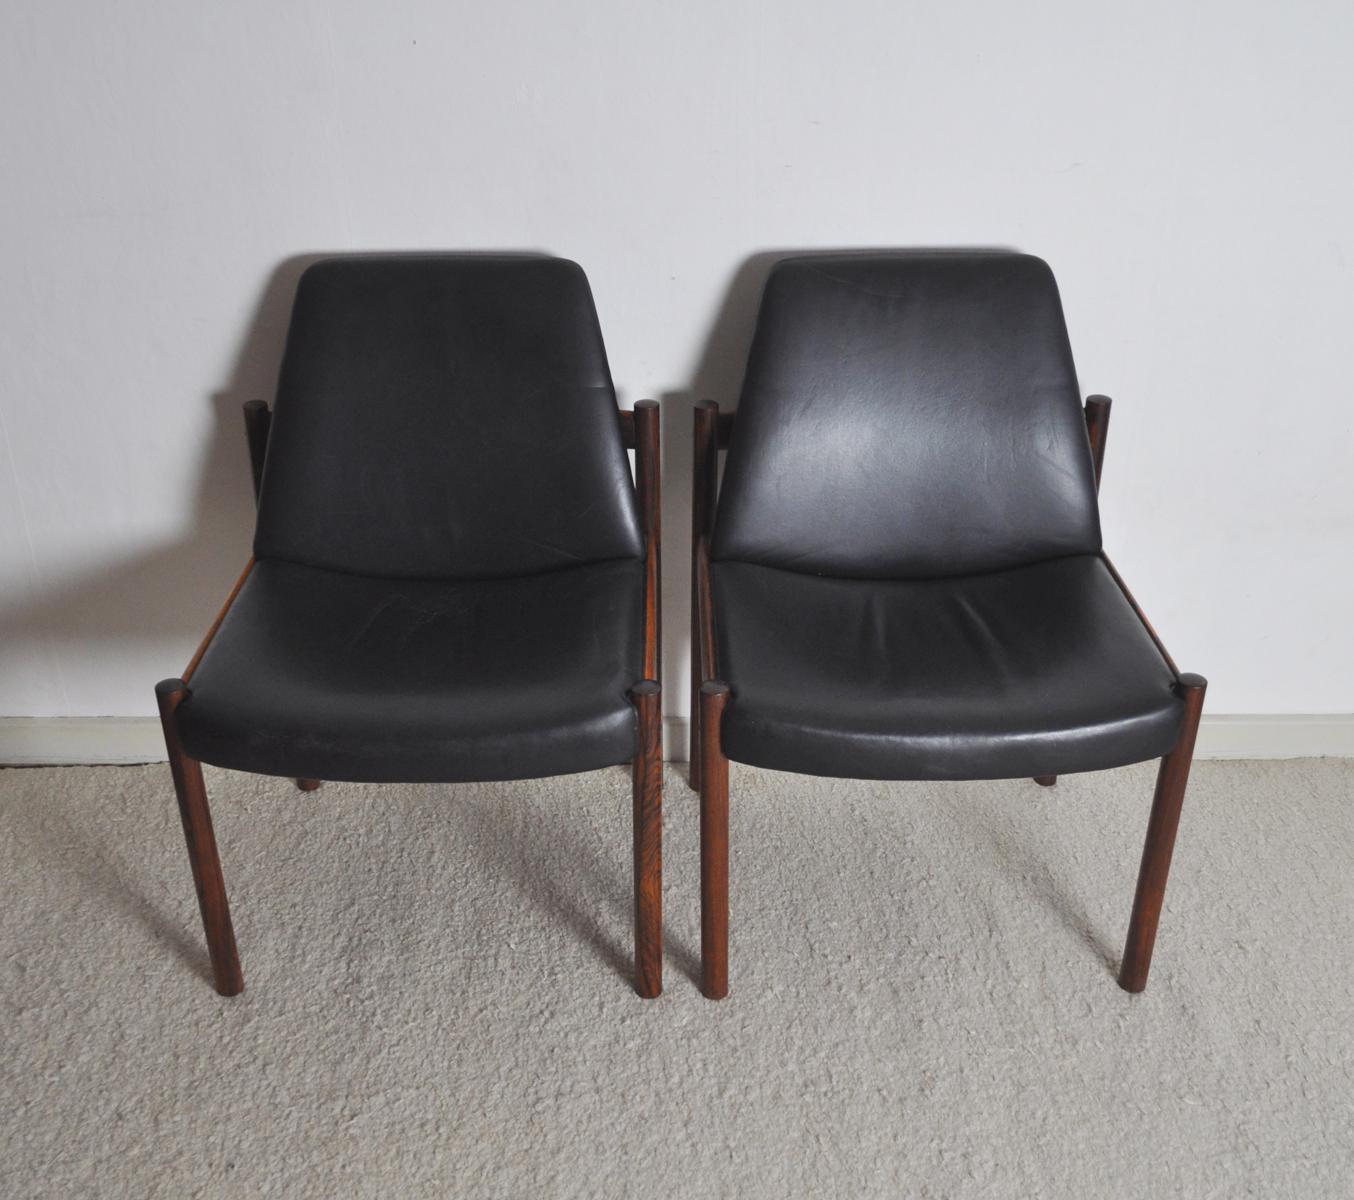 Rosewood and Leather Dining Chair by Sven Ivar Dysthe for Dokka Møbler In Good Condition For Sale In Vordingborg, DK